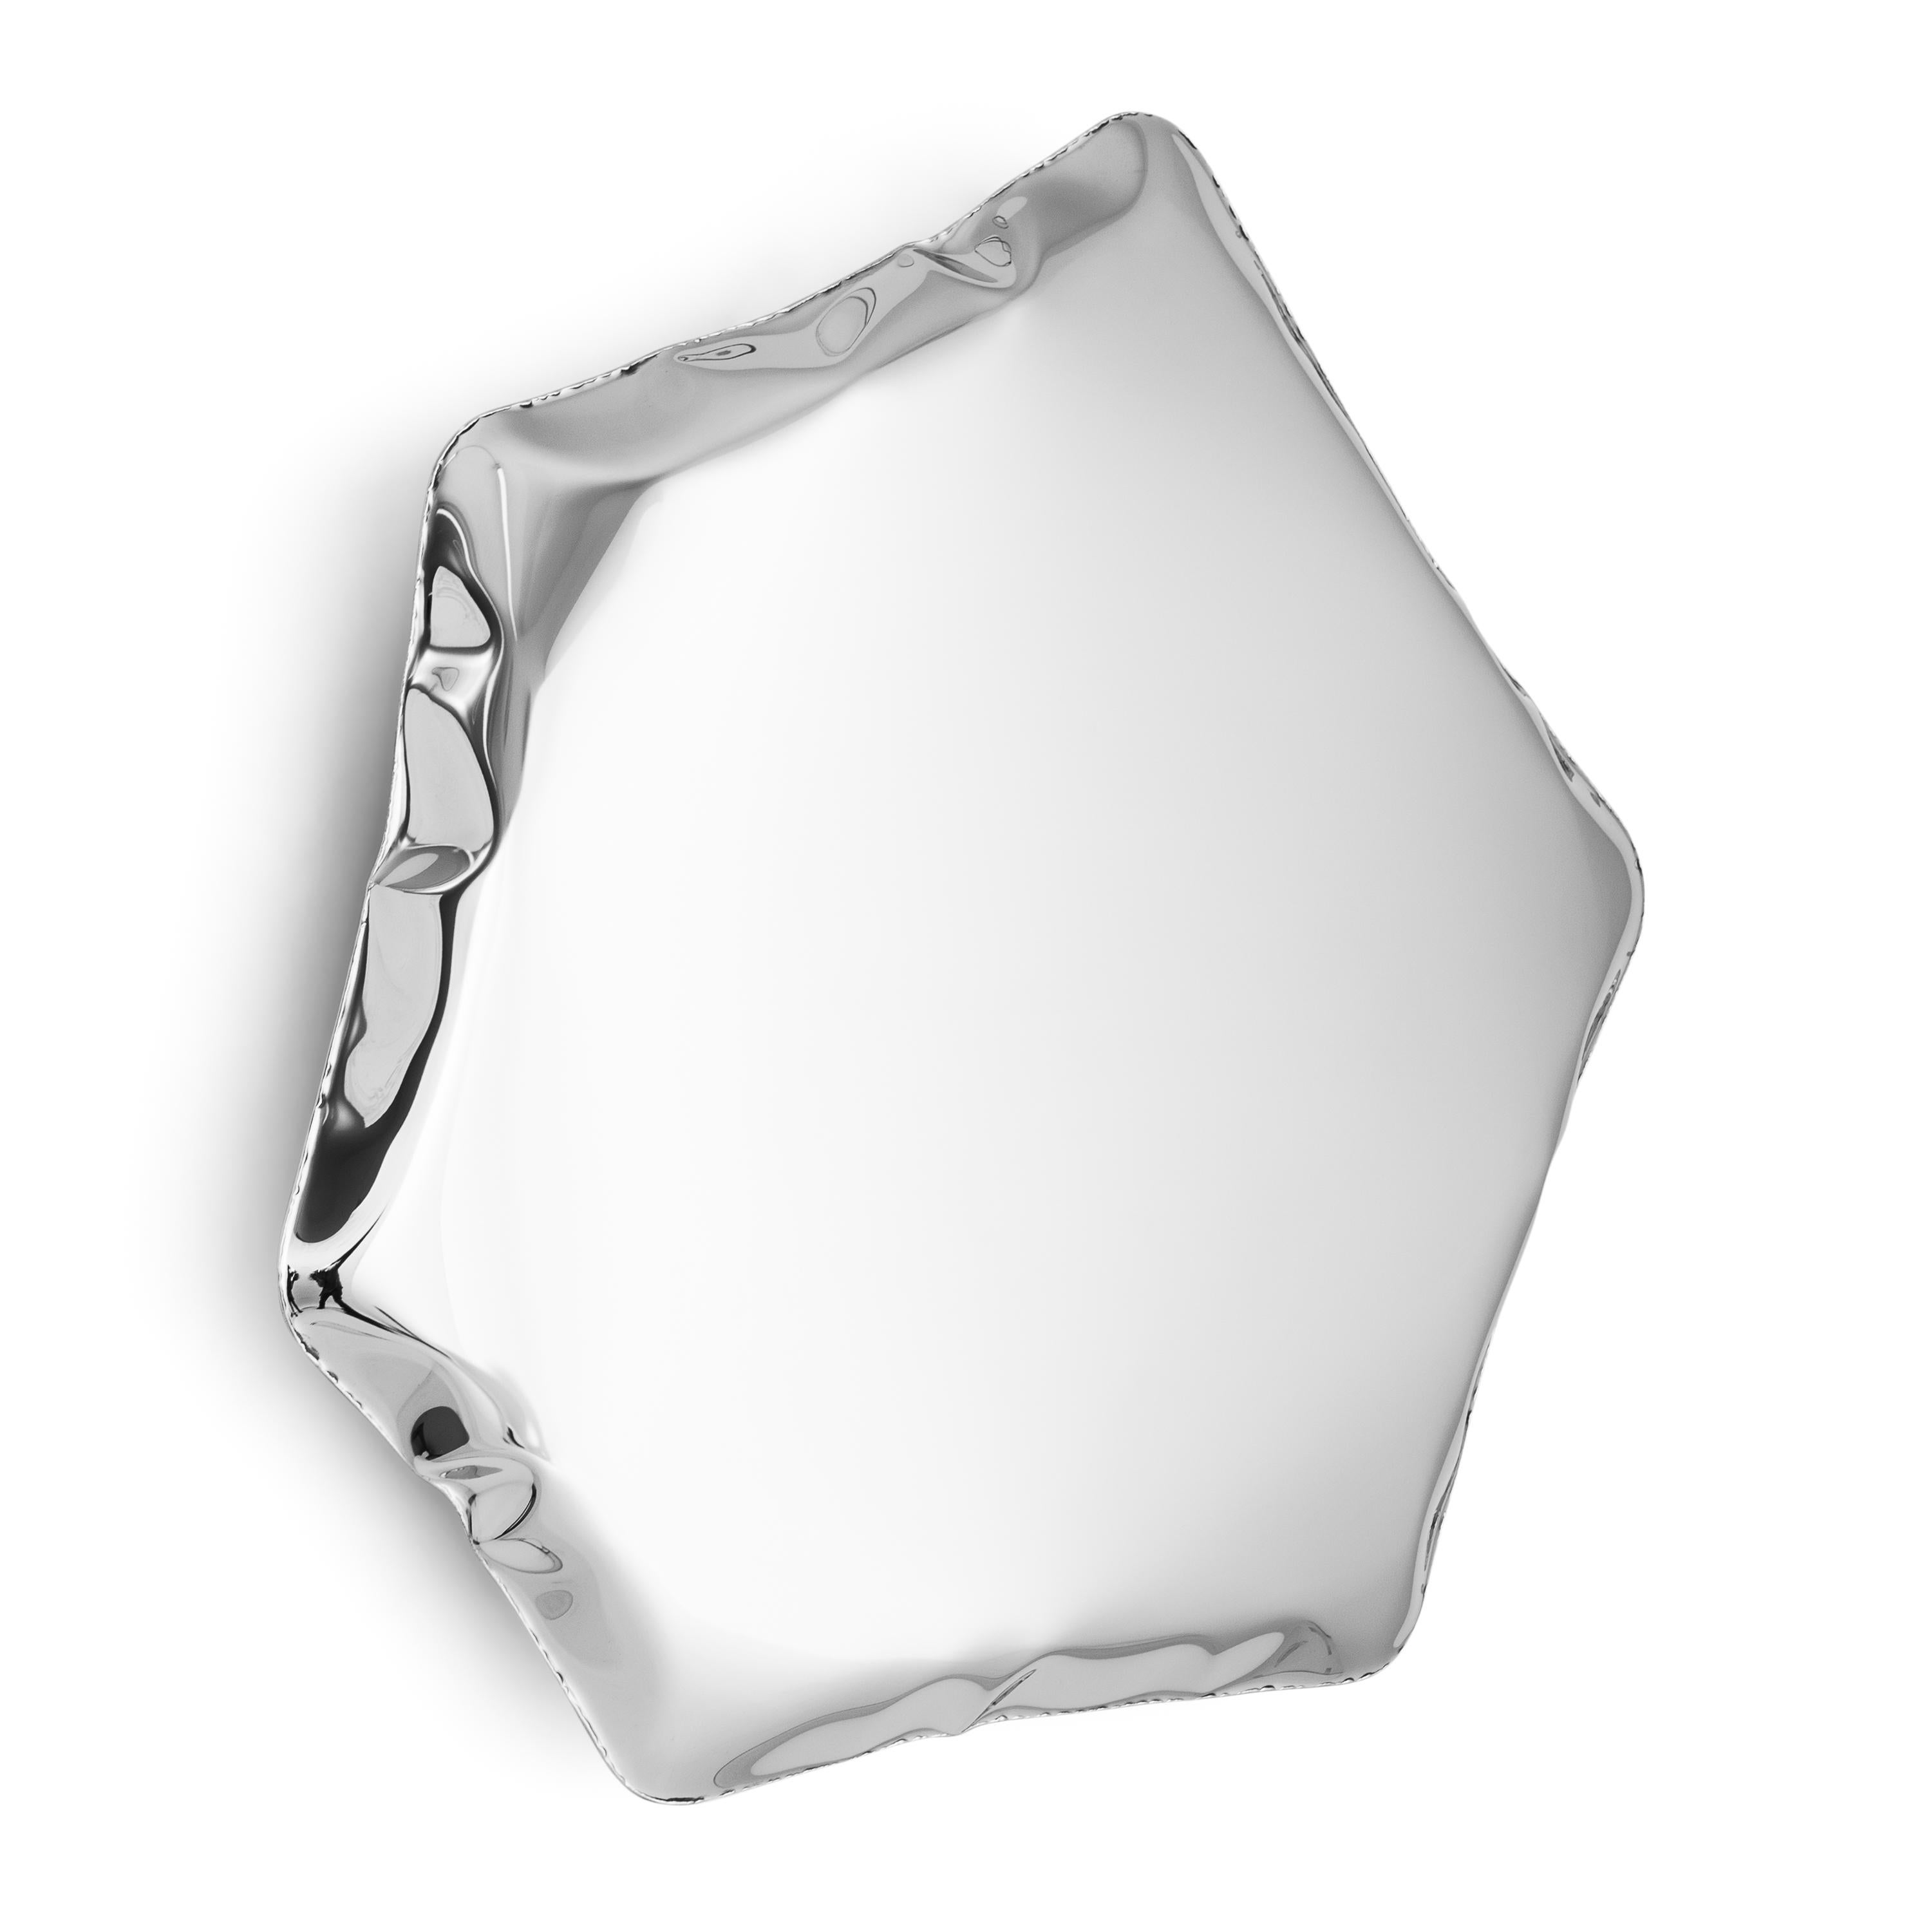 Tafla Mirrors 'Constellation C 3.01' by Zieta, Polished Stainless Steel For Sale 2